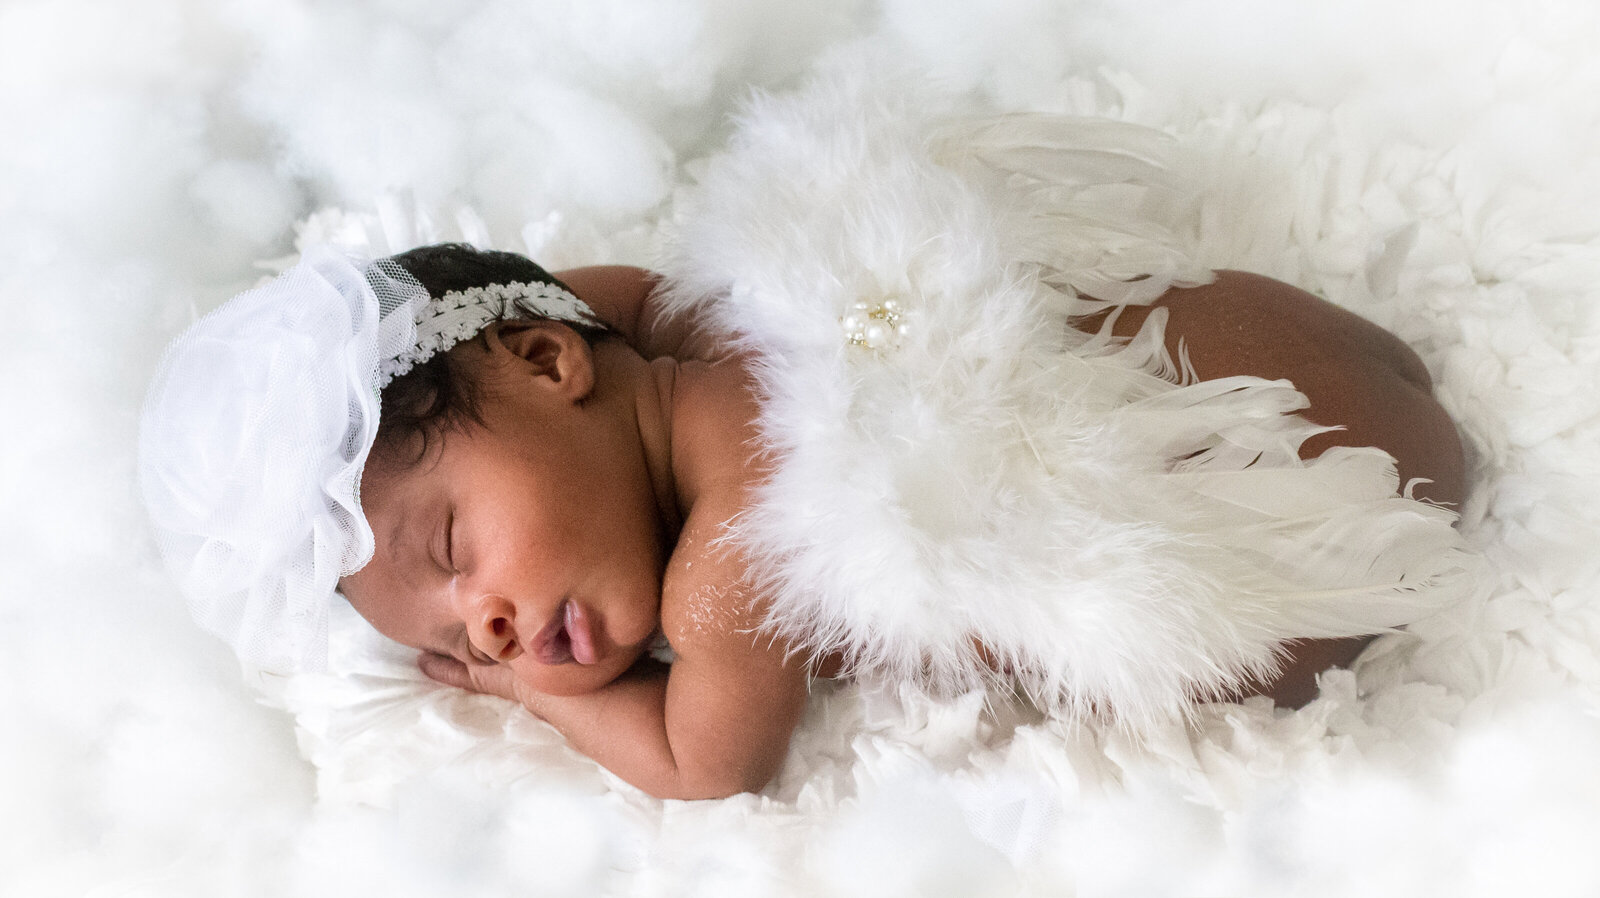 newborn sleeping in bed of cotton (clouds) with angel wings on back